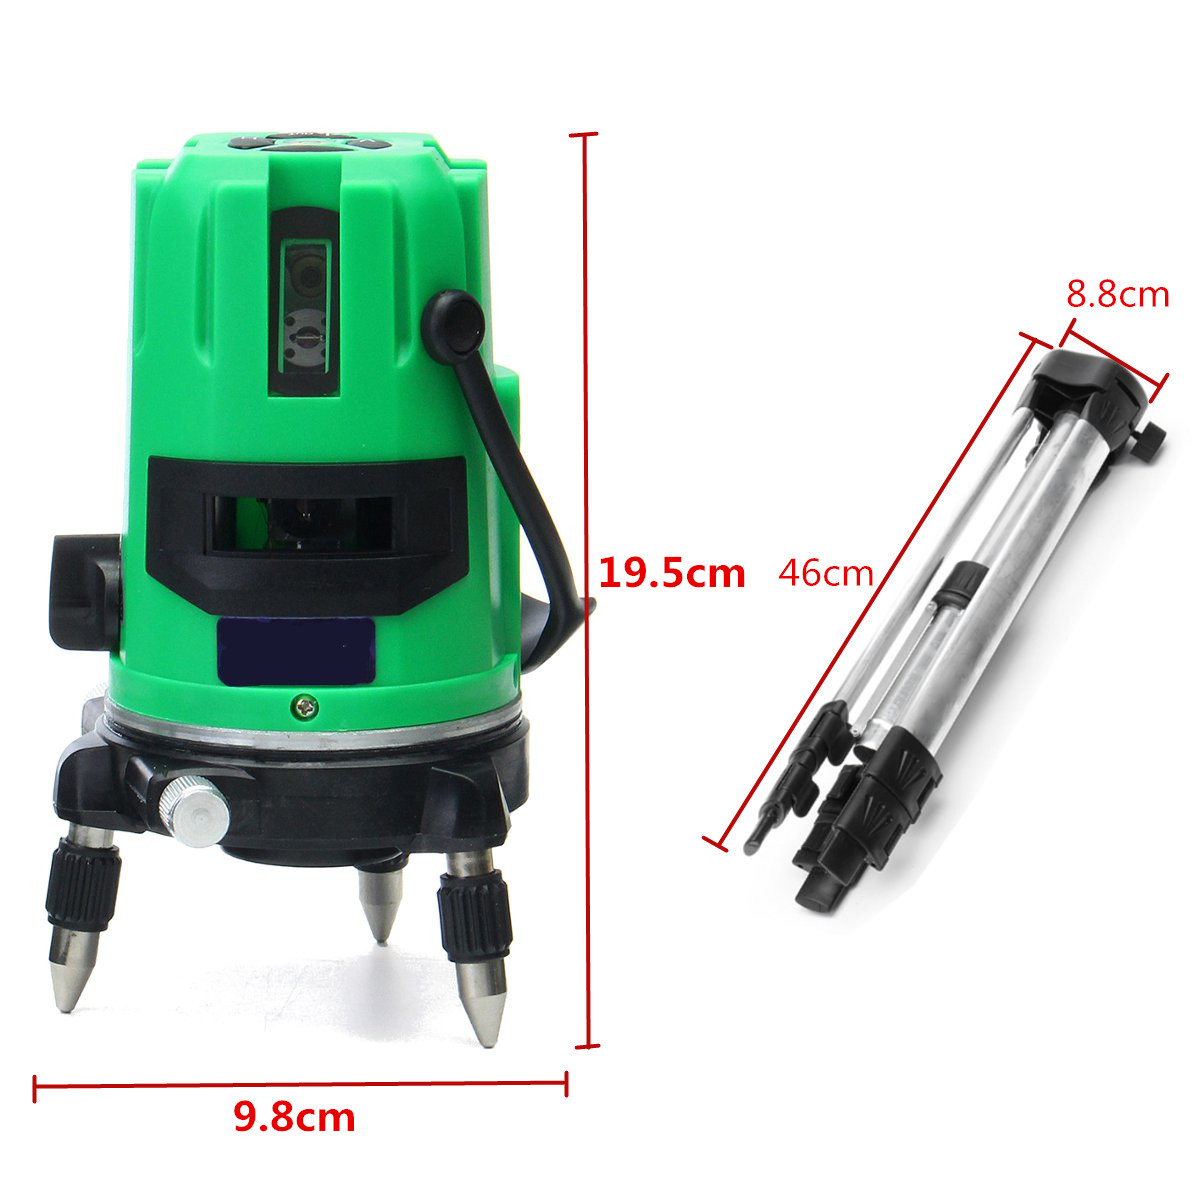 Green-2-Line-2-Points-Laser-Level-360-Rotary-Laser-Line-Self-Leveling-with-Tripod-1166735-10